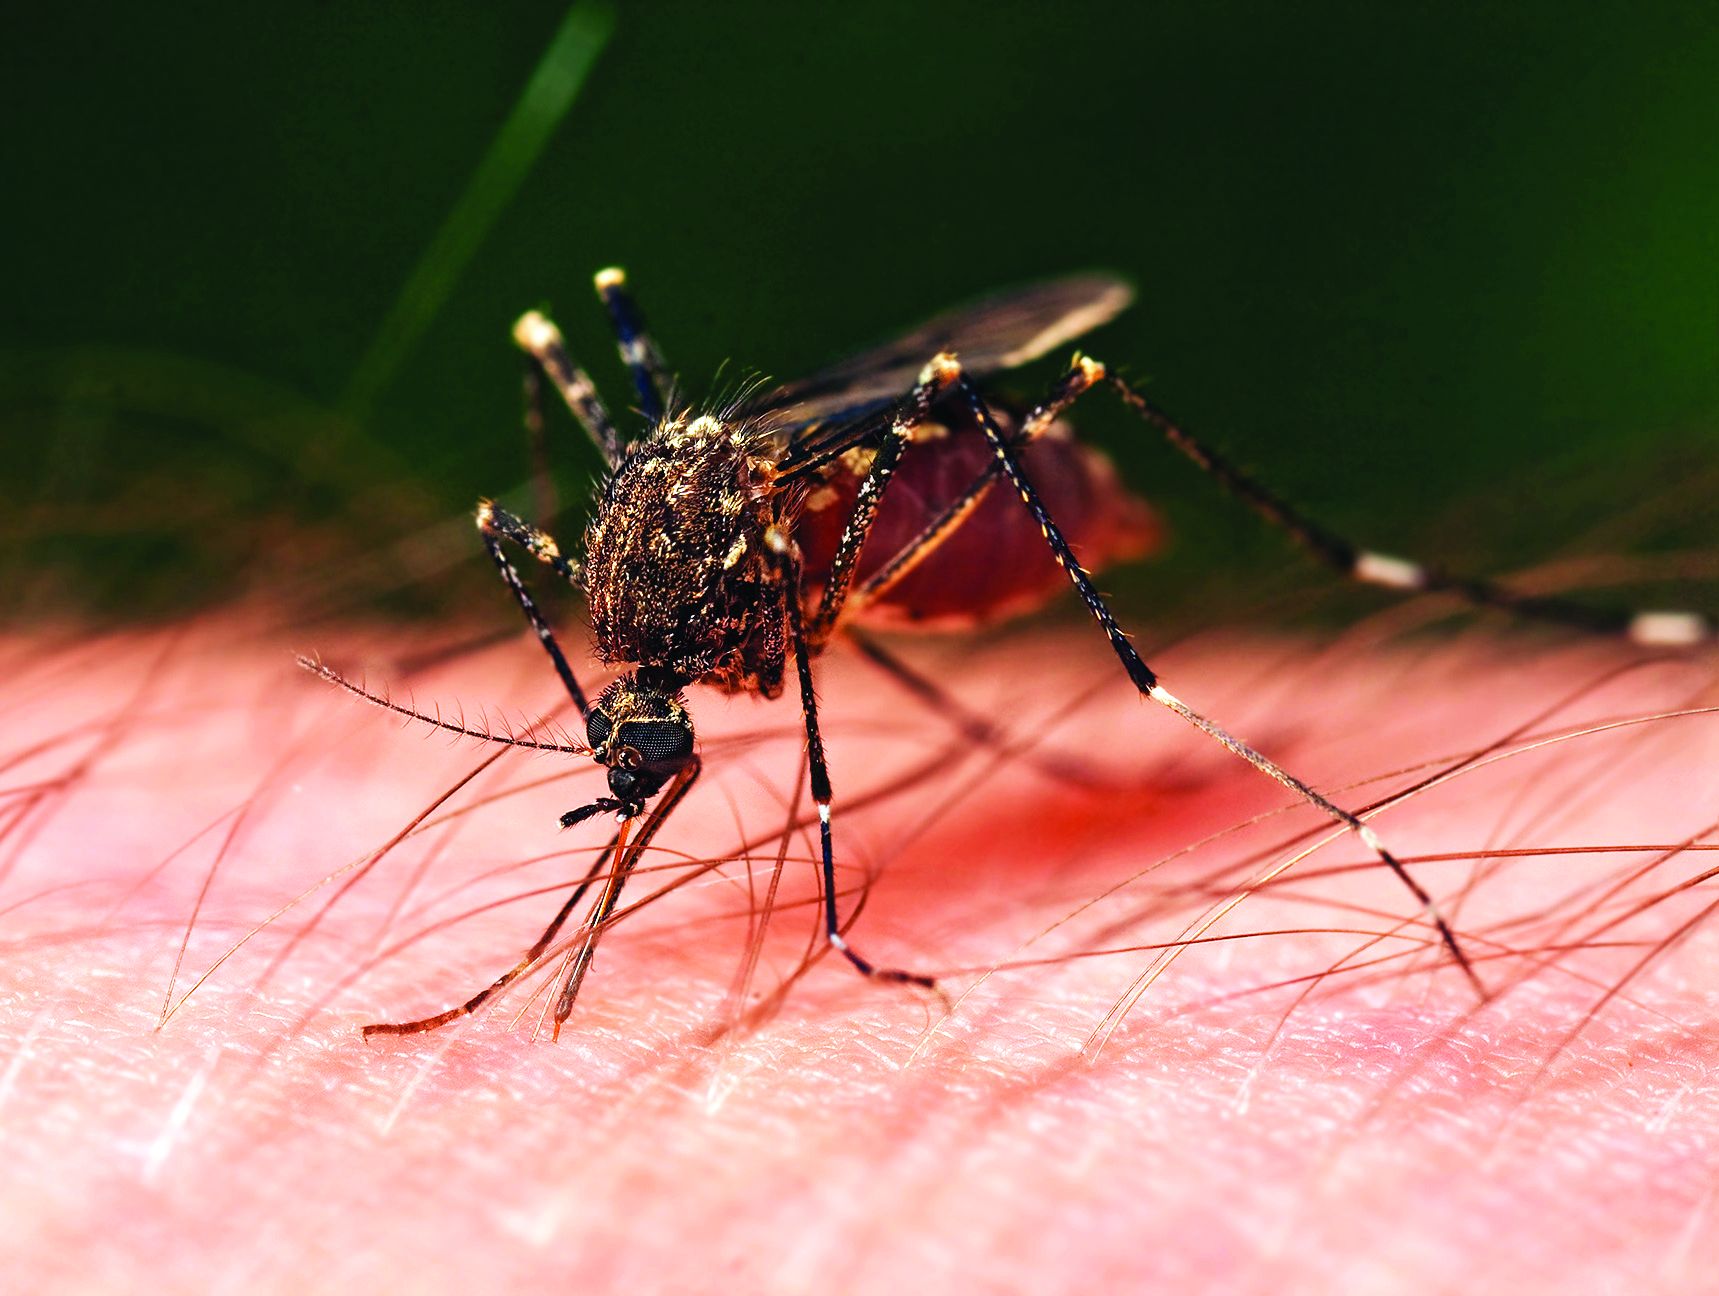 Mosquito larvae with 'dengue' after 'swine flu'